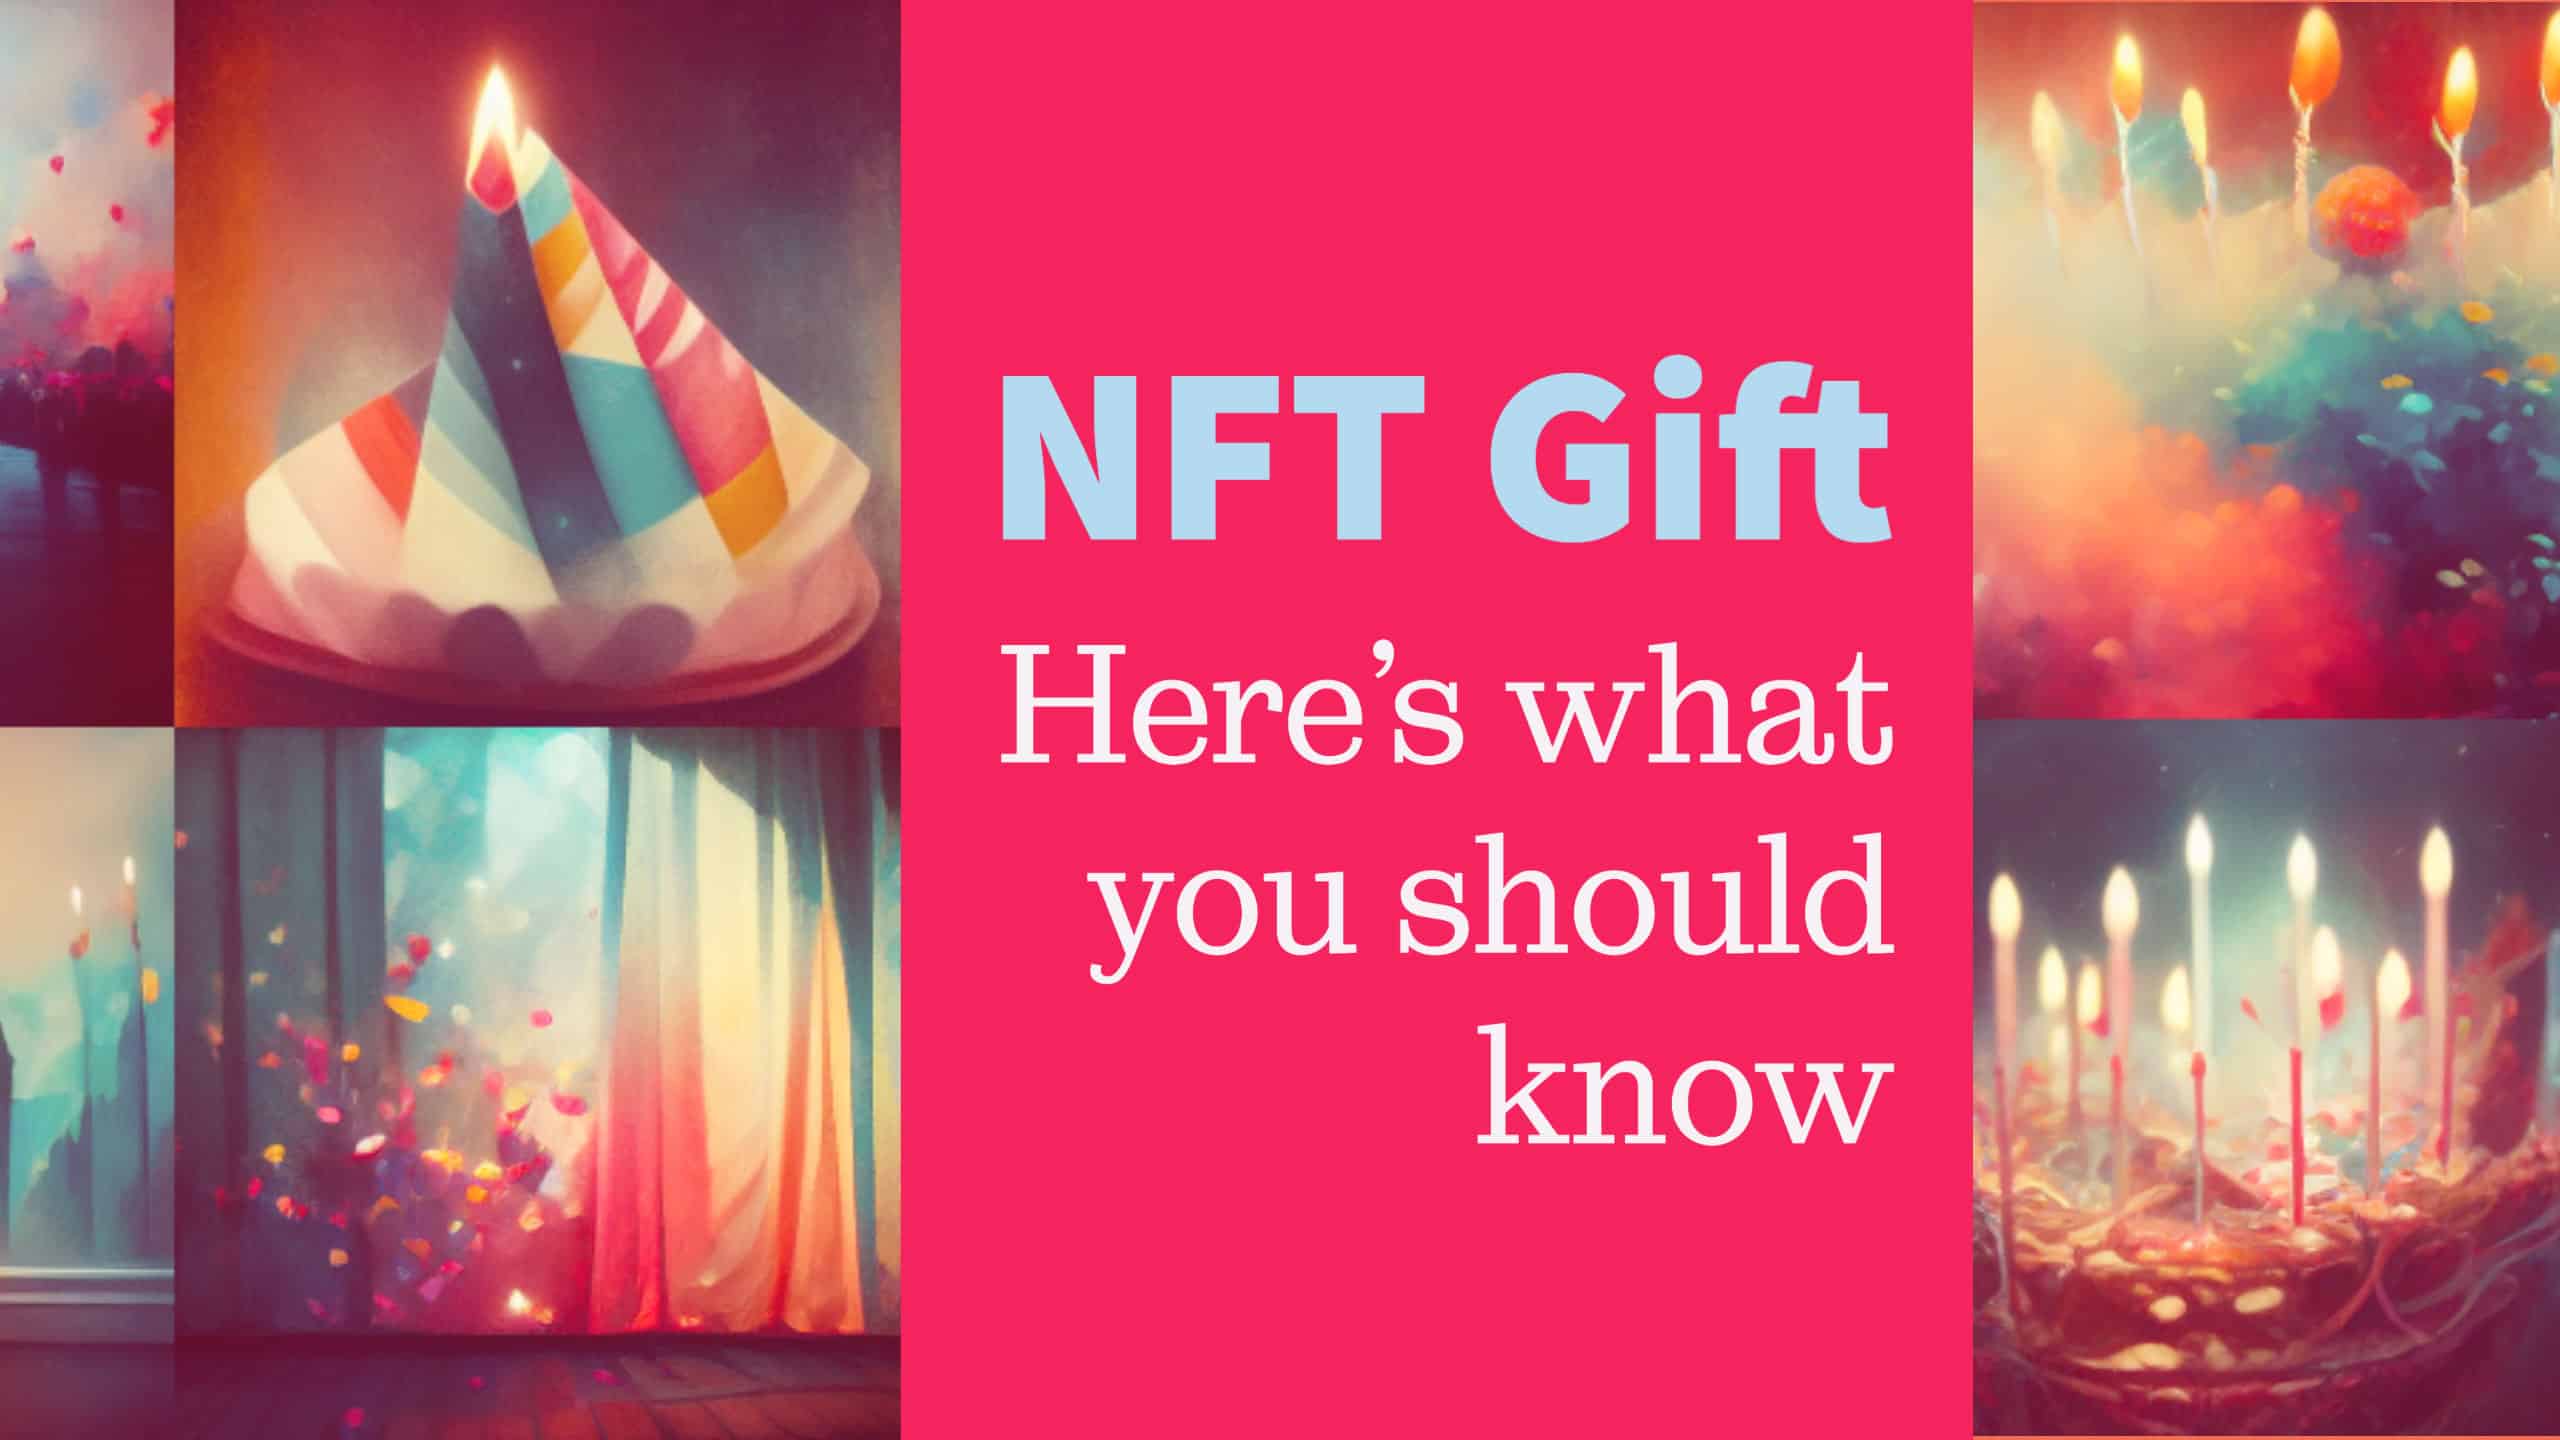 NFT Gift: Here’s what you should know